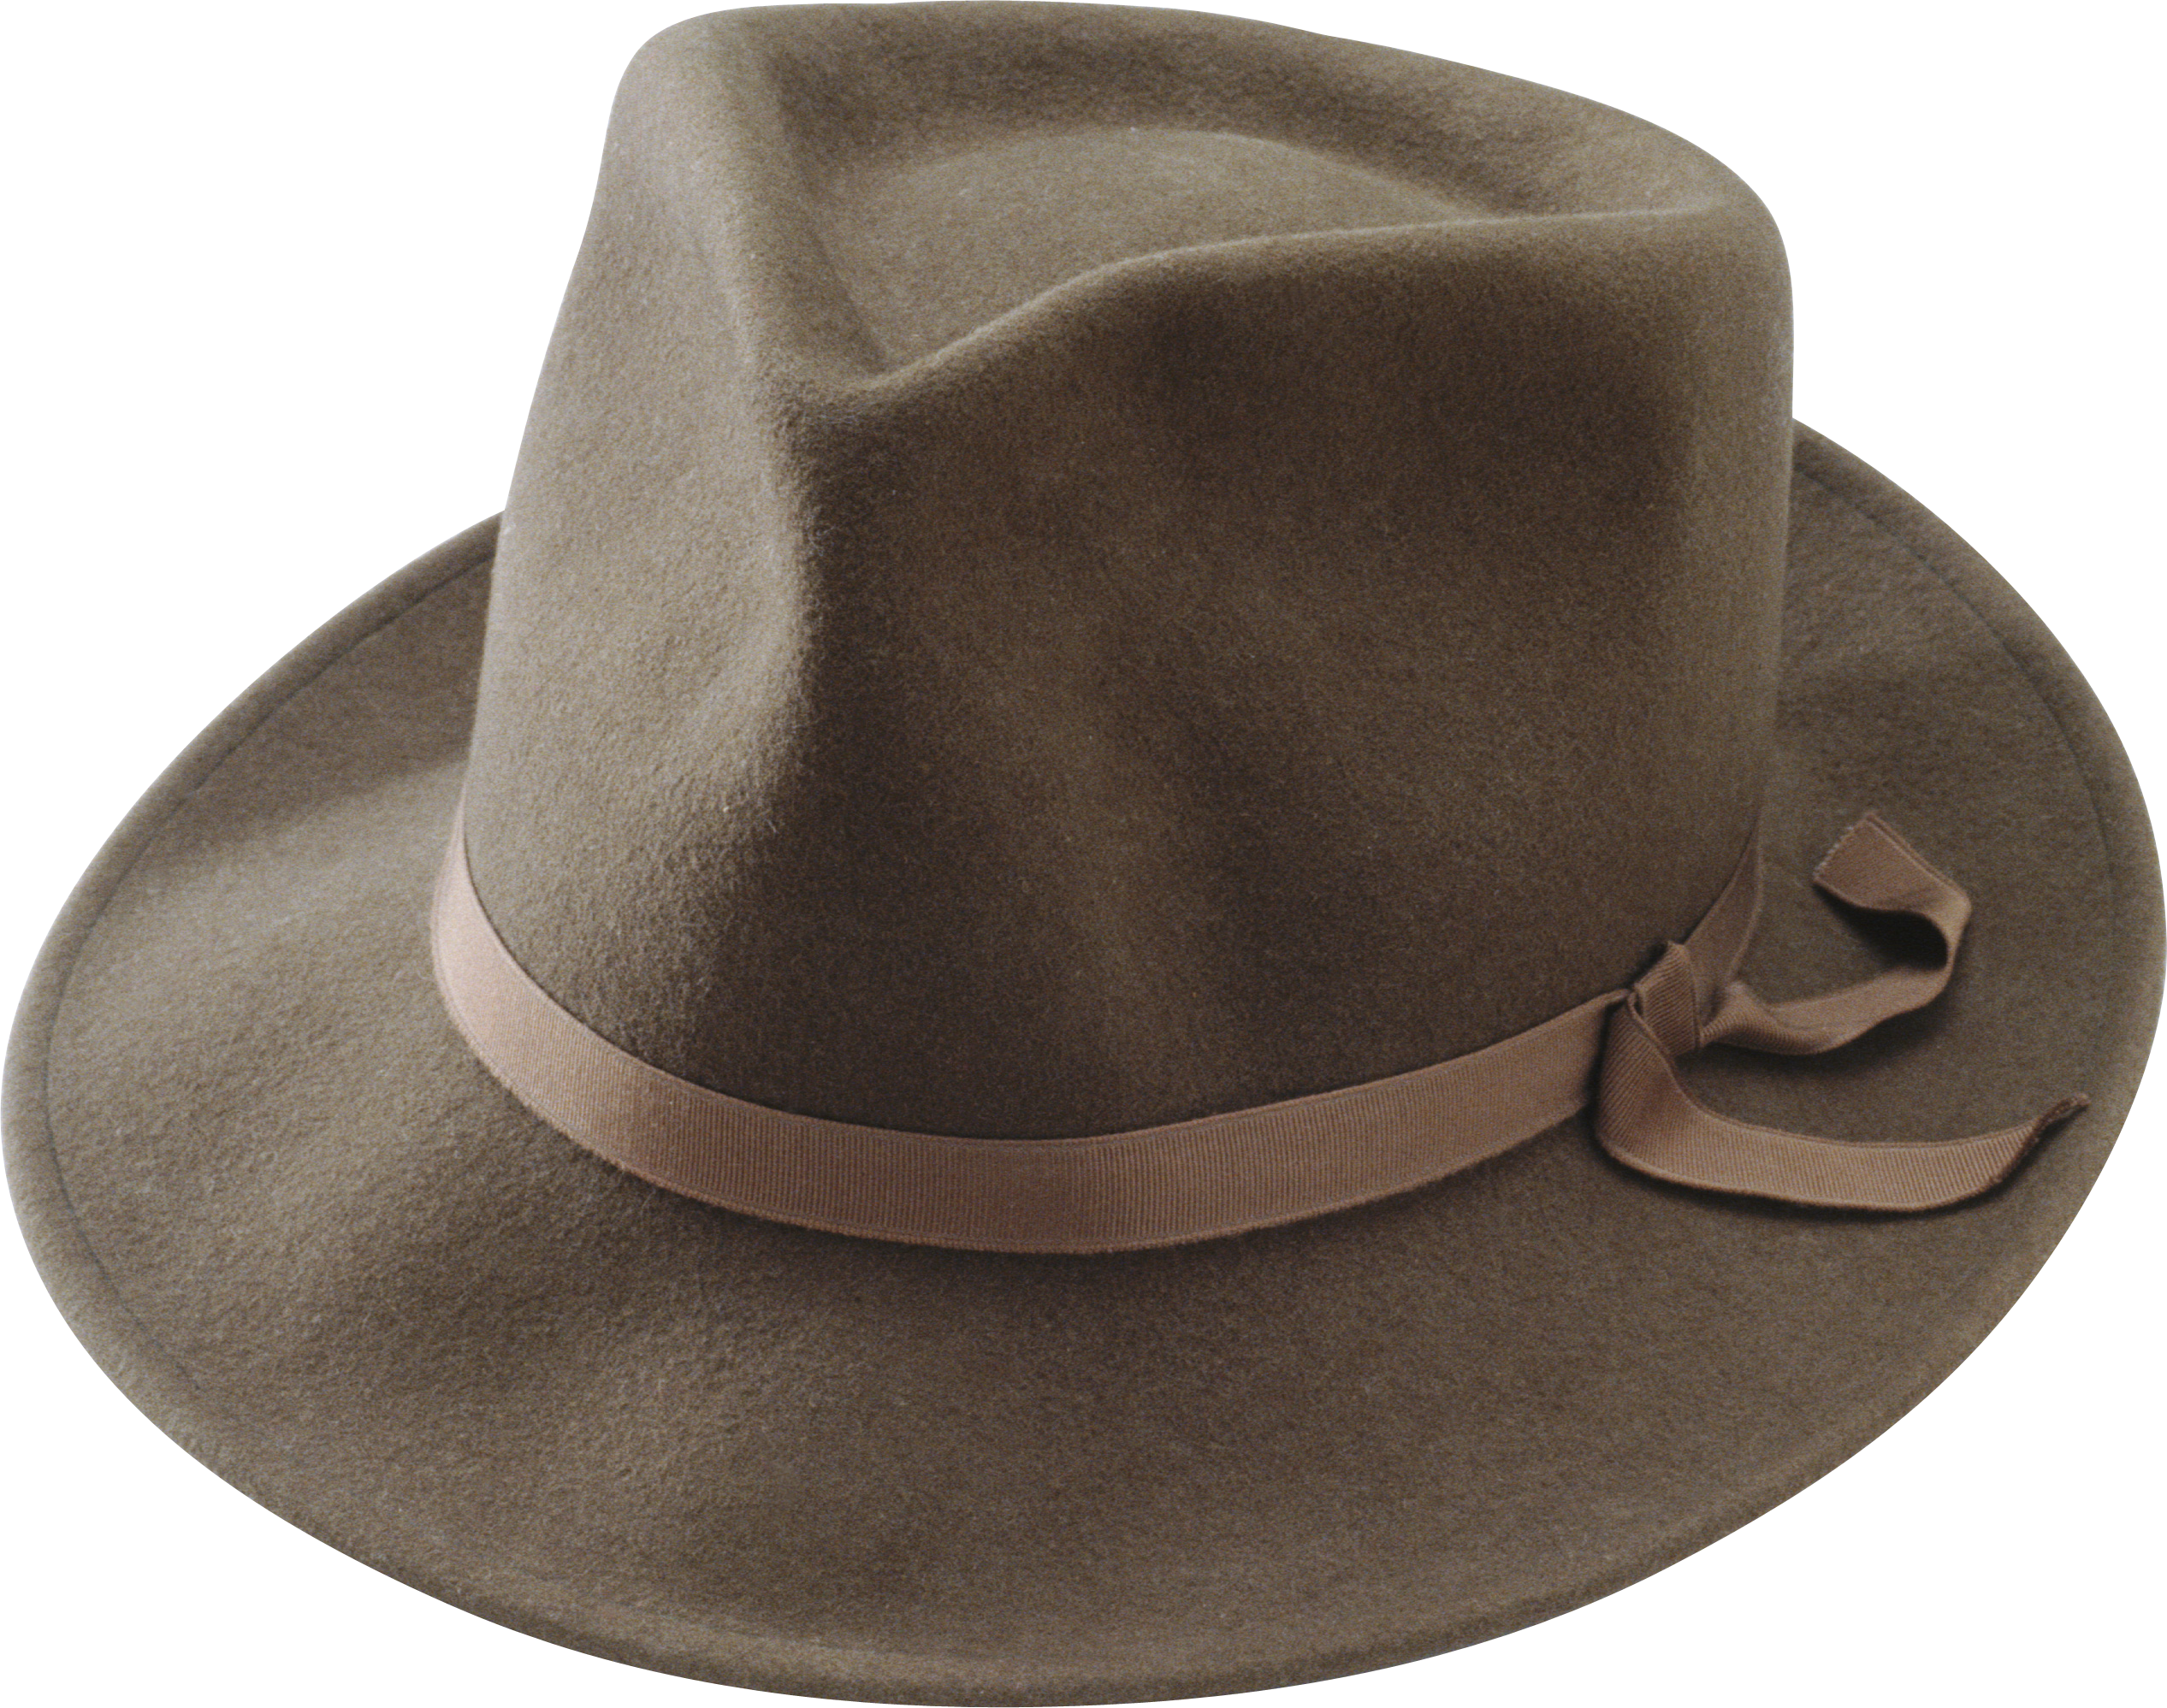 Fedora clipart boys hat, Fedora boys hat Transparent FREE for download